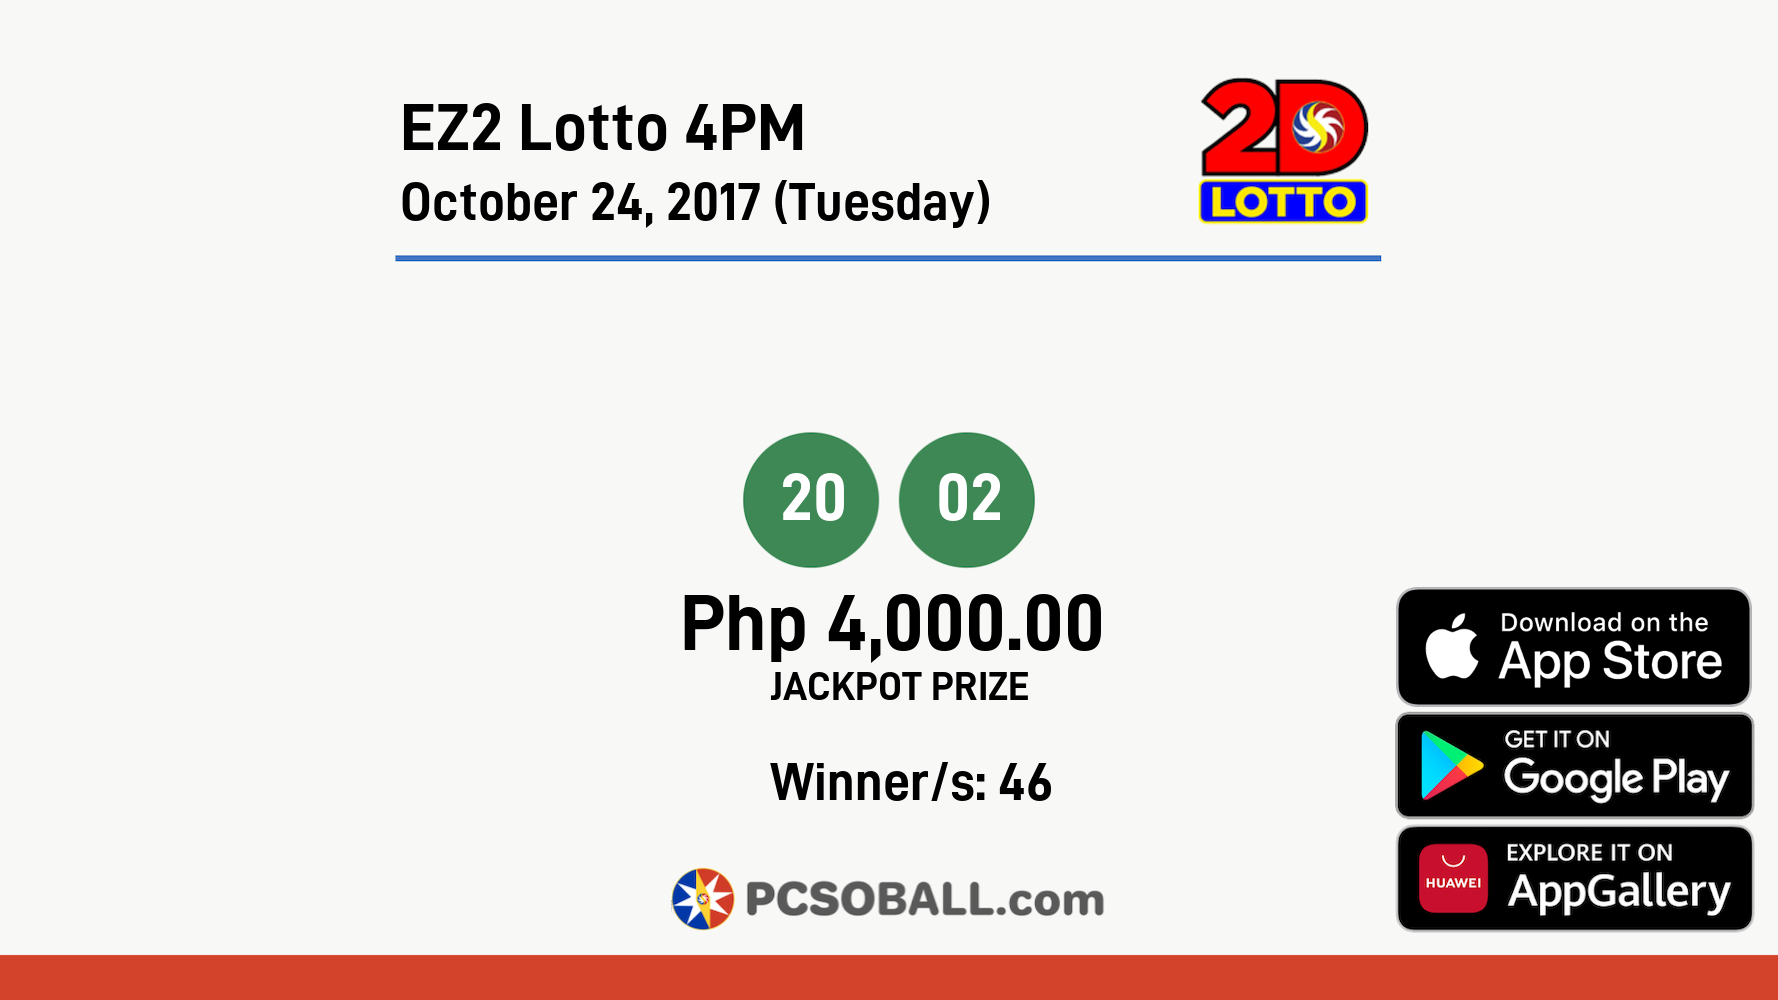 EZ2 Lotto 4PM October 24, 2017 (Tuesday) Result